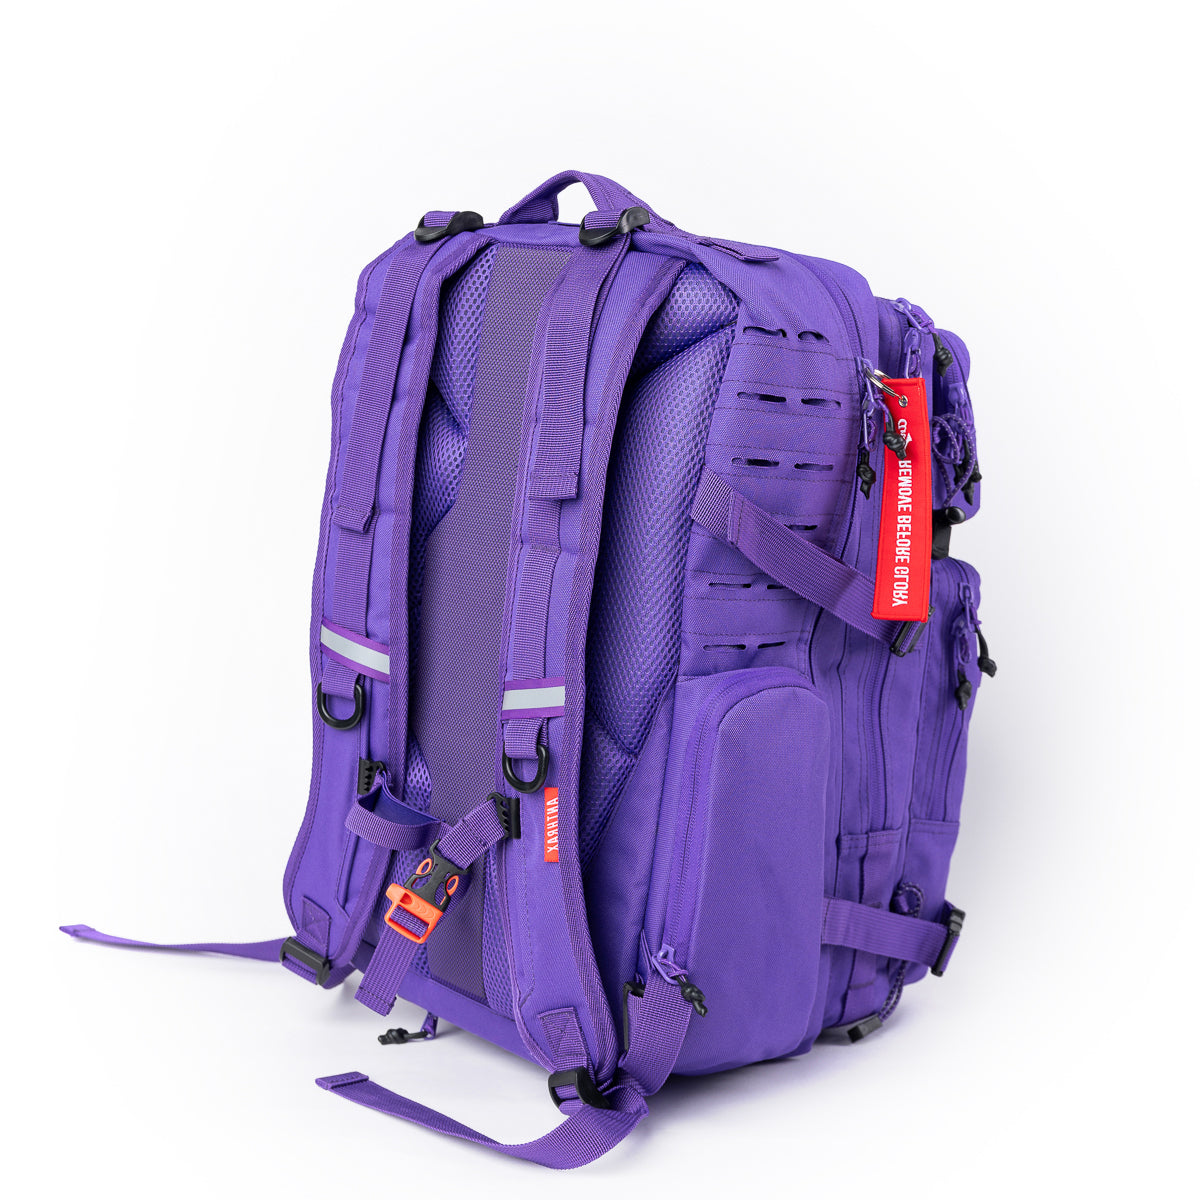 Deployment 3.0 Backpack - Funky Purple 45L Anthrax Machines